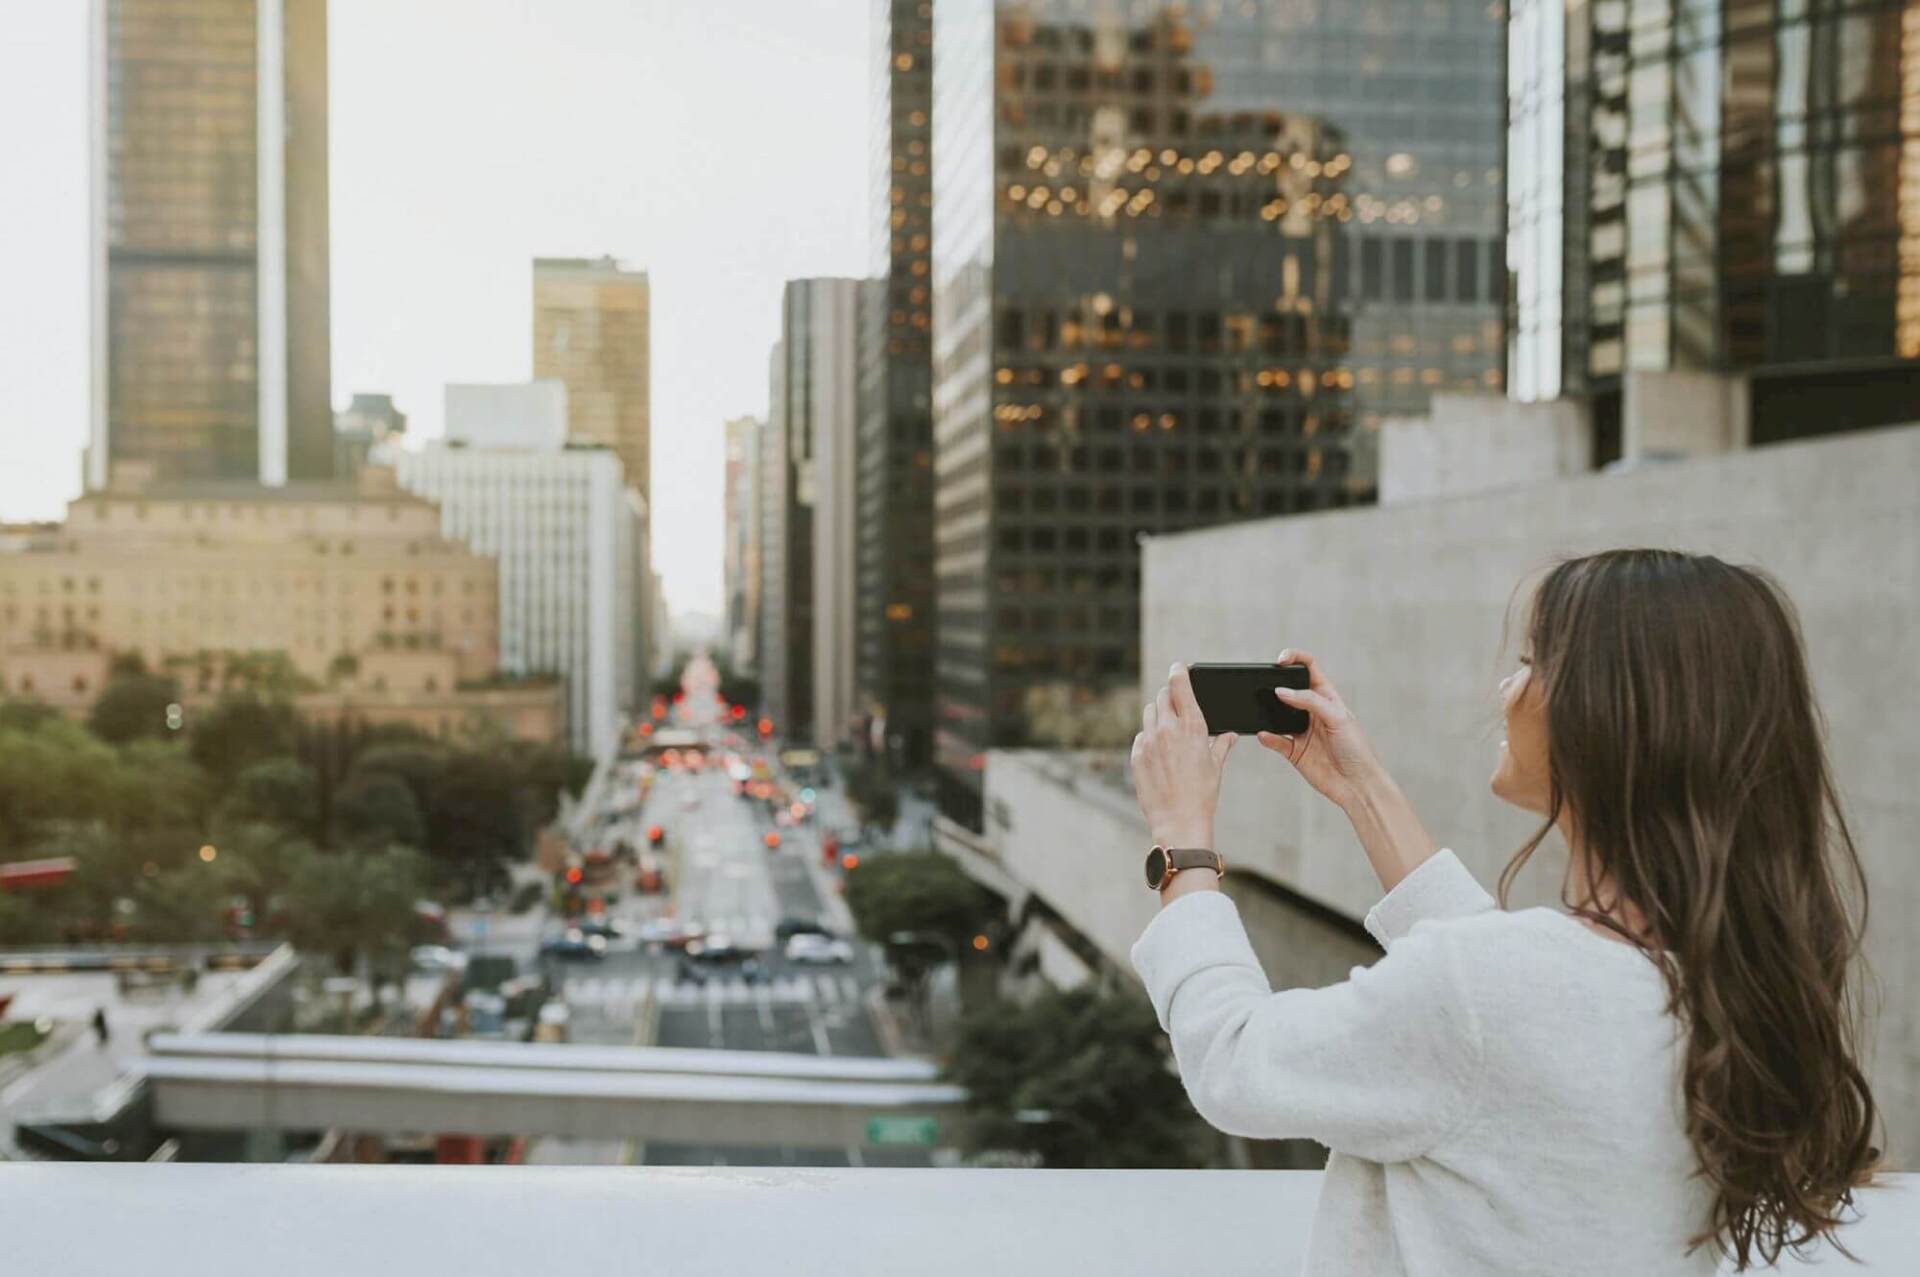 A woman is taking a picture of a city with her cell phone.